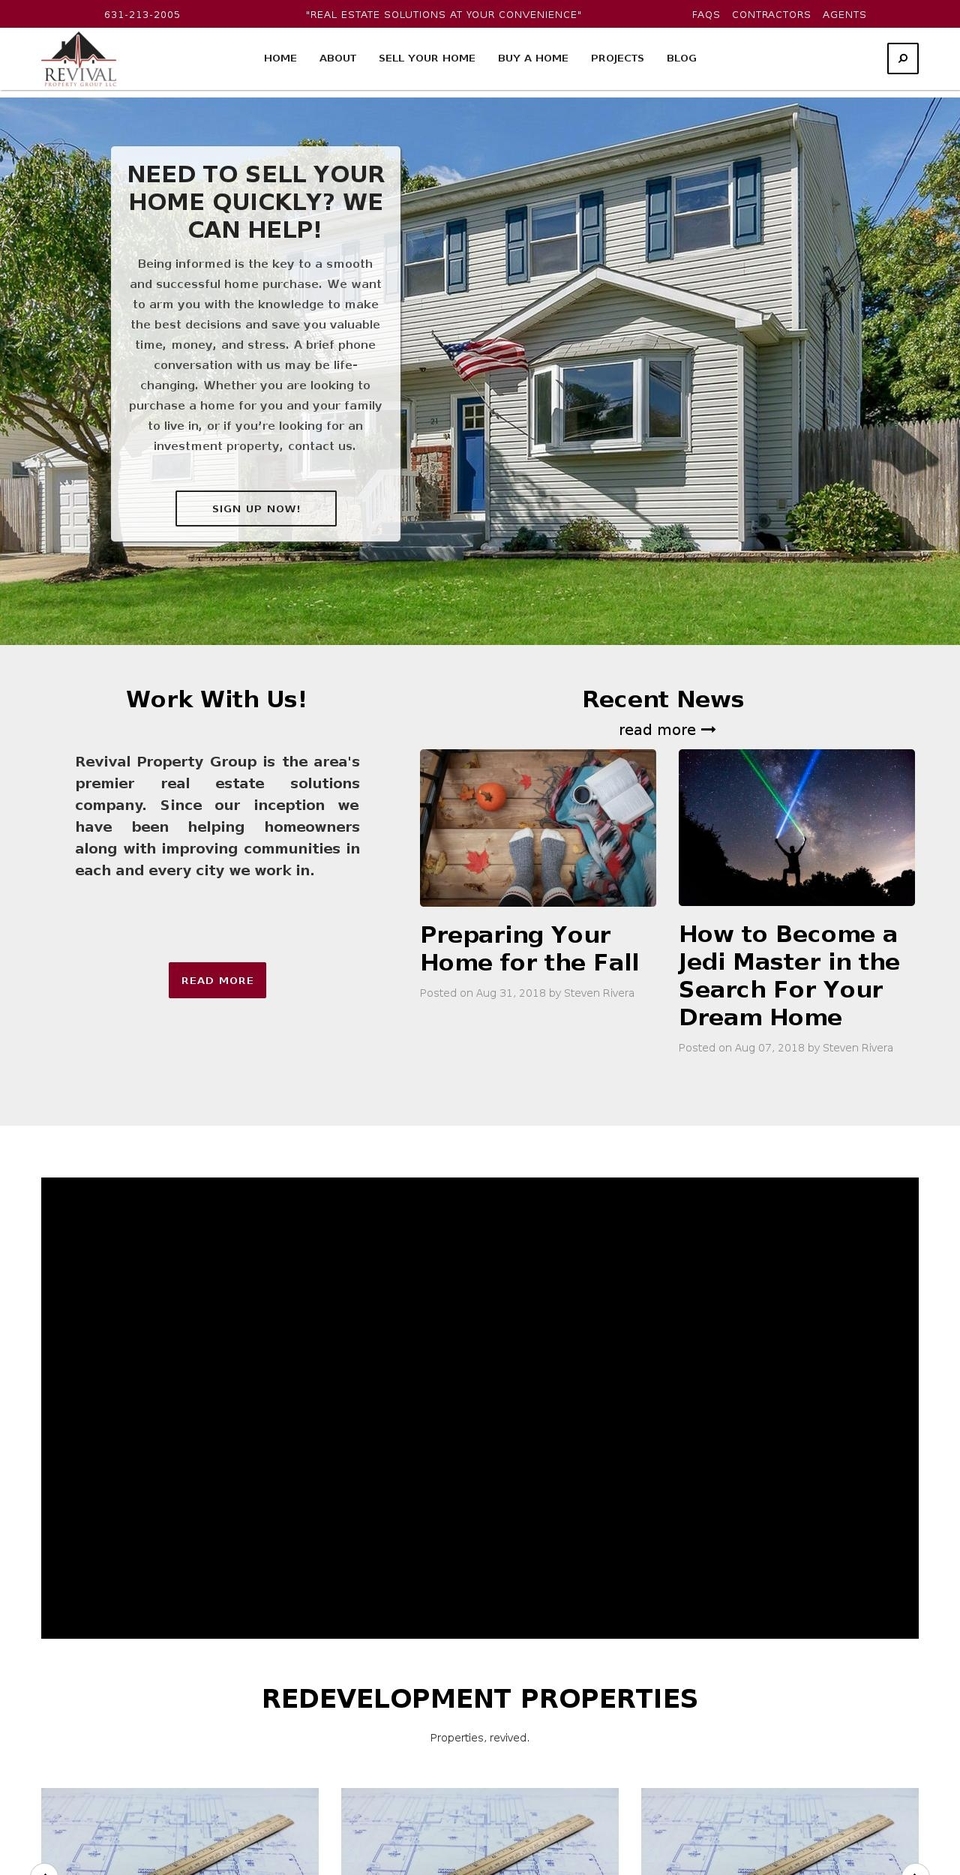 Made With ❤ By Minion Made Shopify theme site example revivalpropertygroupllc.com